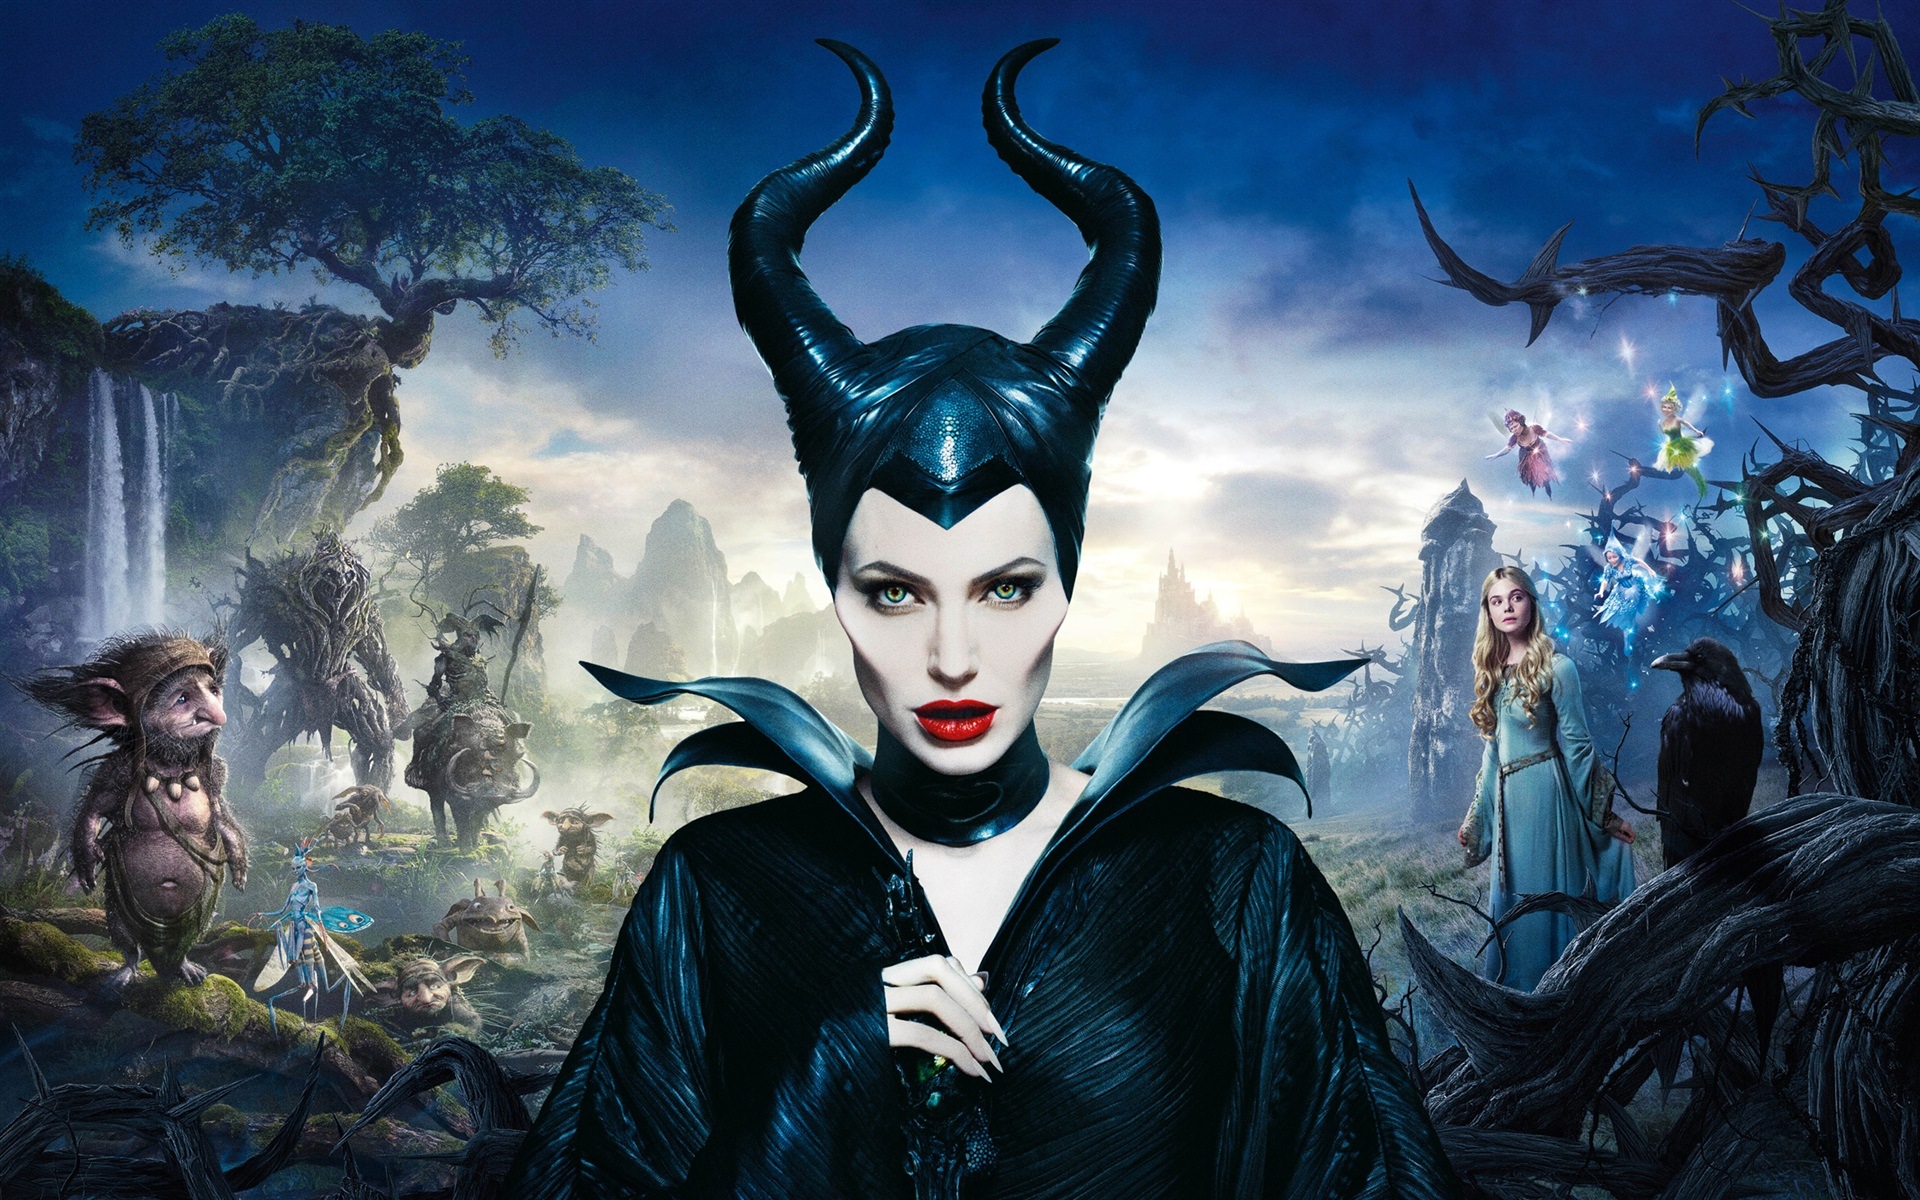 Maleficent 2014 HD movie wallpapers #6 - 1920x1200